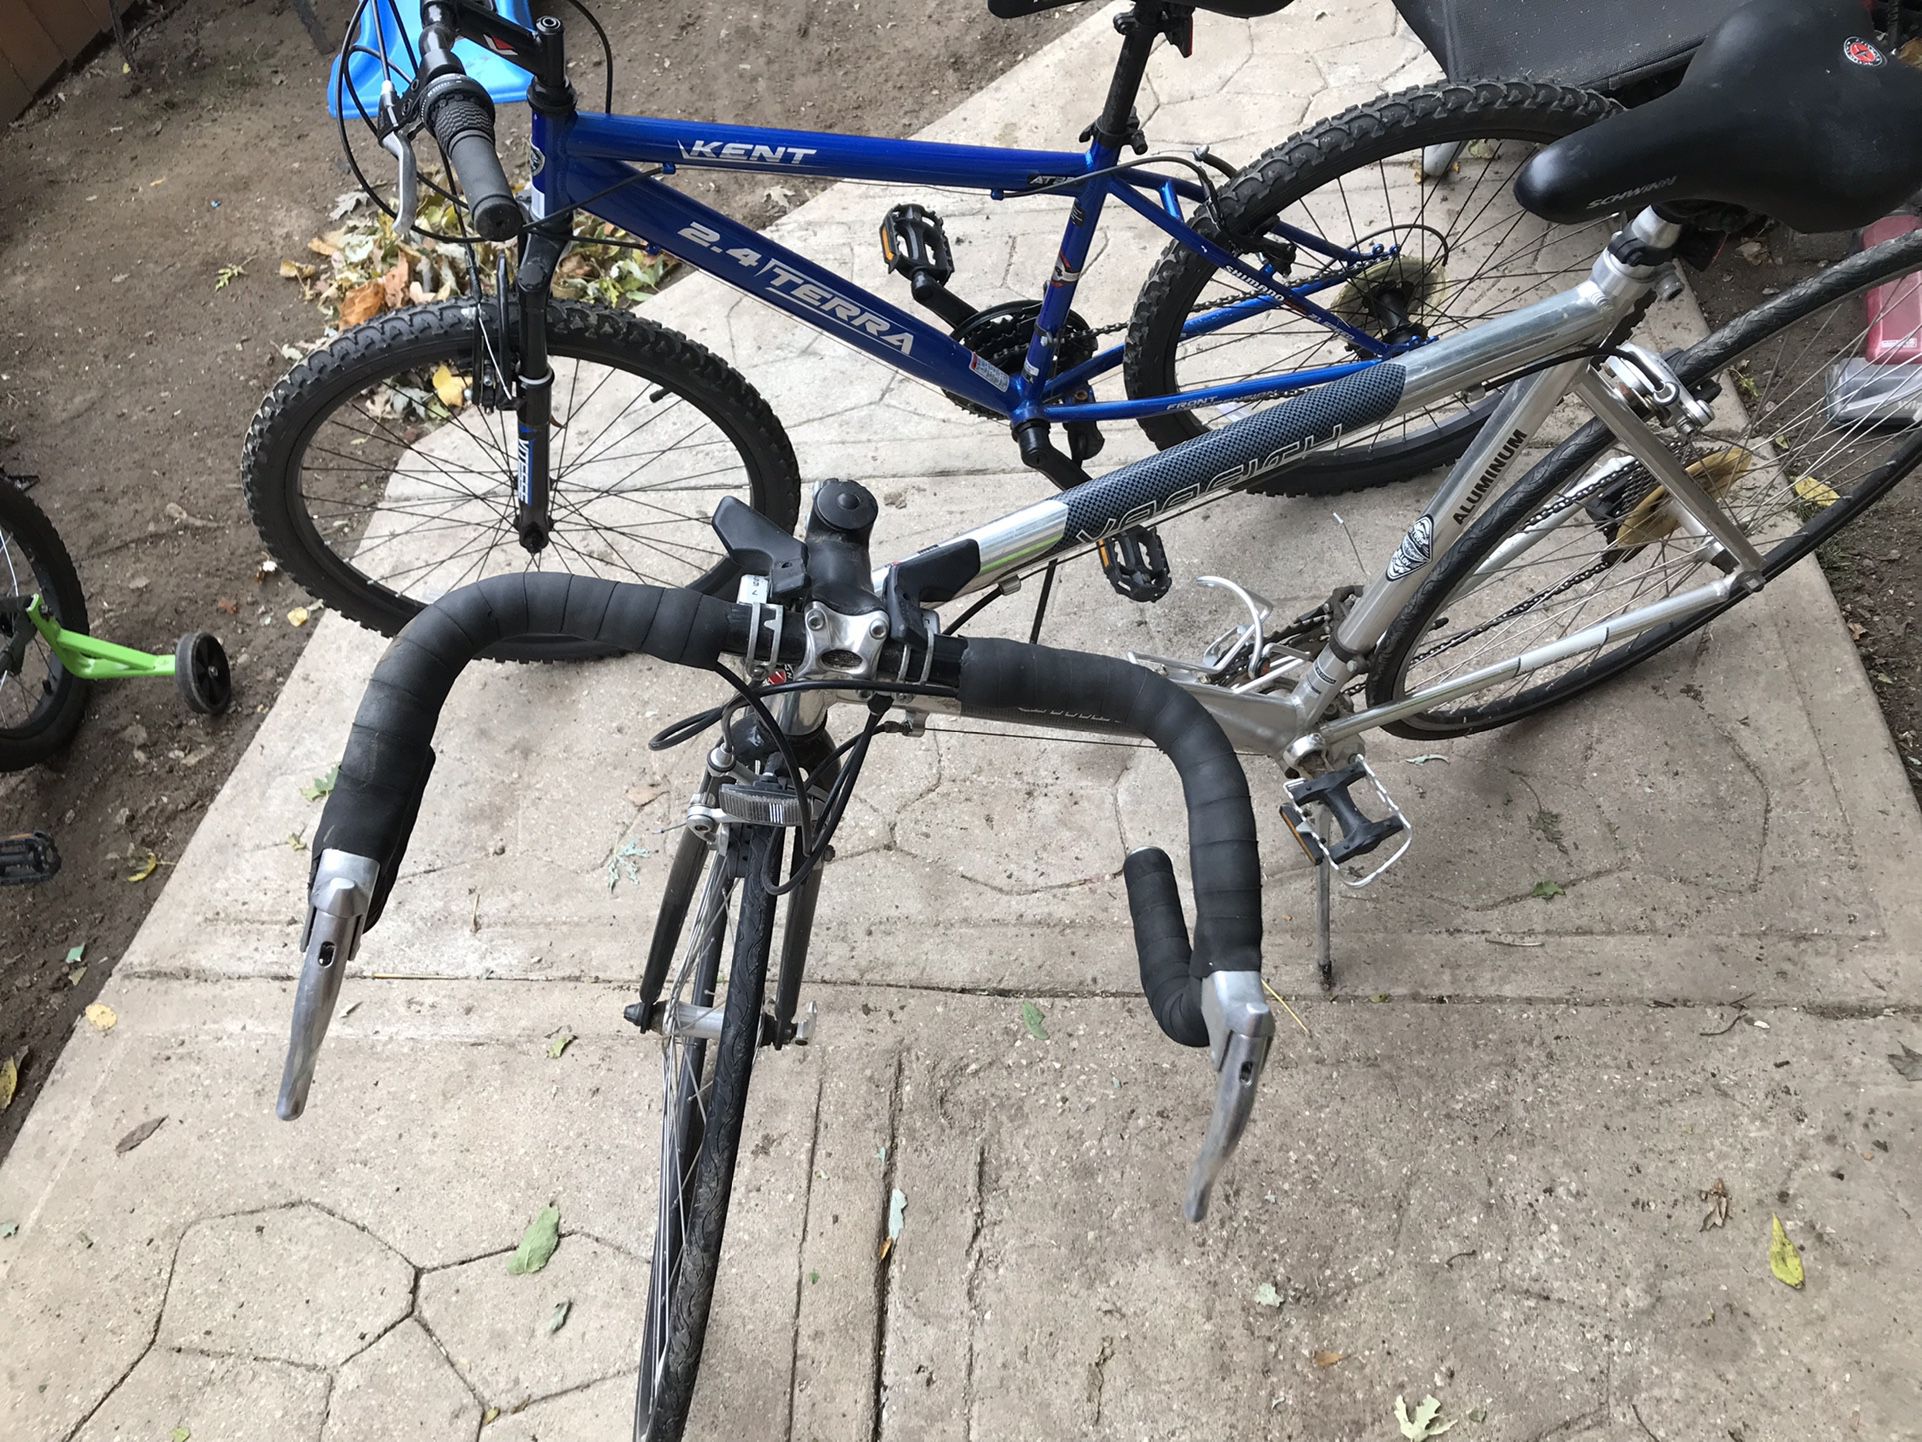 2 Bikes  $150 for Both  Pick Up Today 